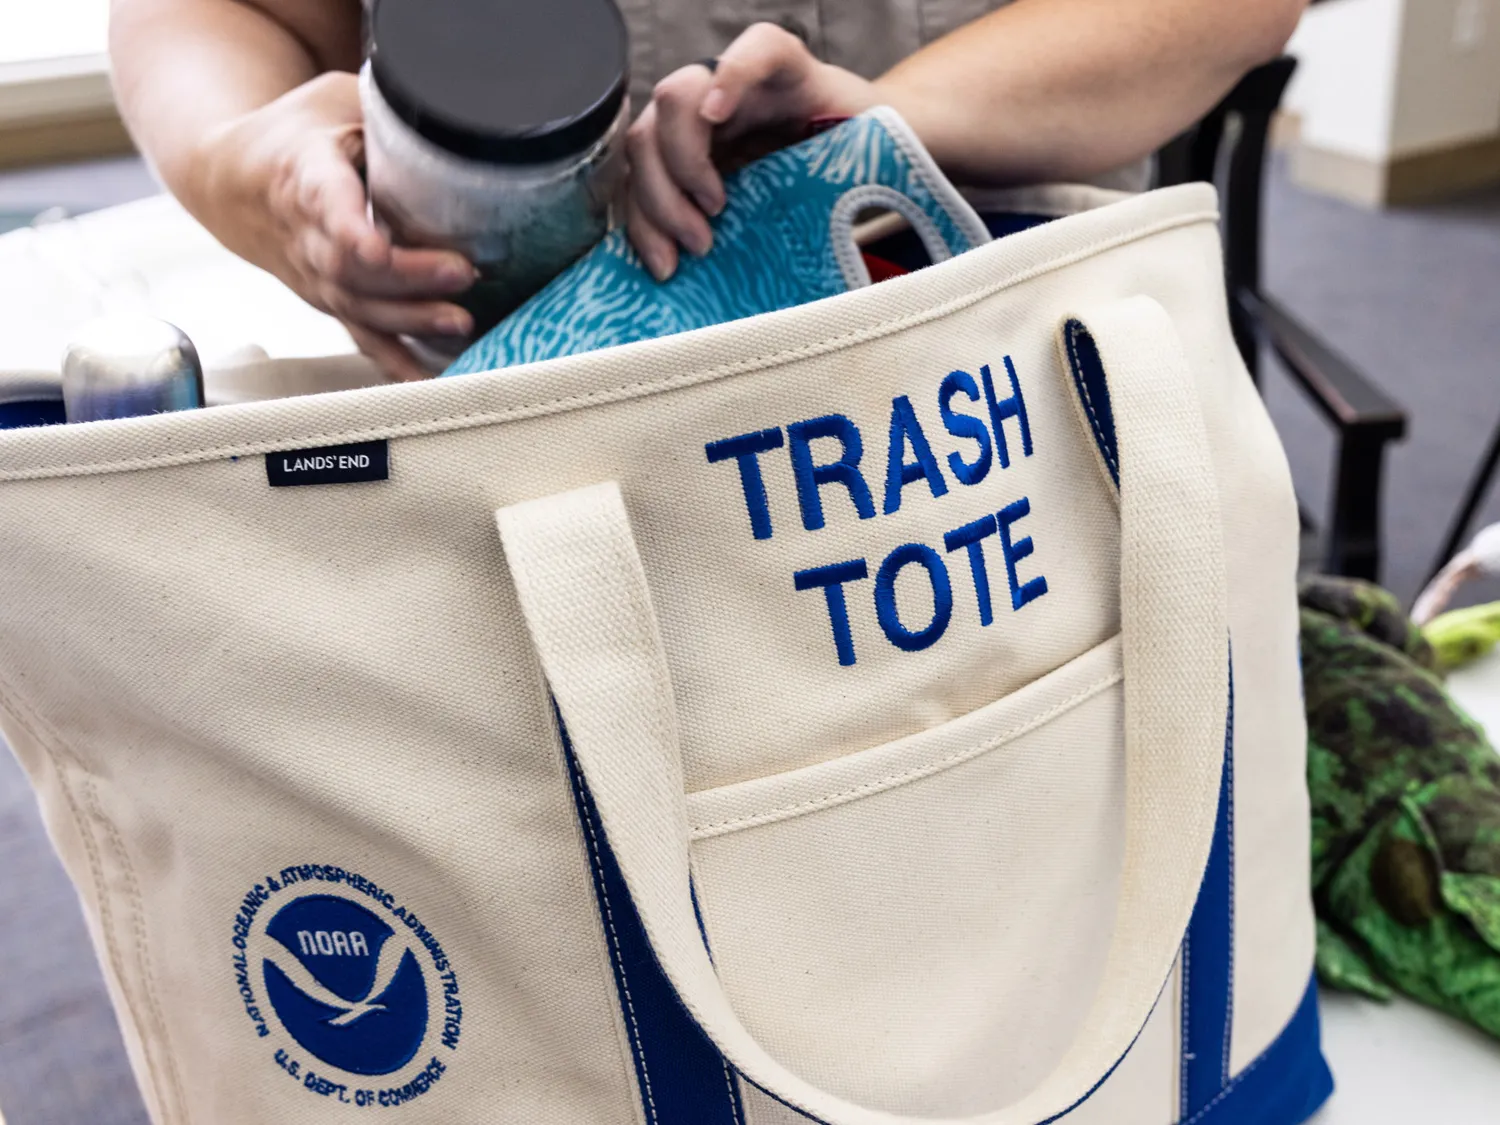 A large canvas bag has trash tote and a National Oceanic & Atmospheric Administration logo embroidered on the side. A person, whose hands are the only parts of them that can be seen, is picking up what seems like a plastic jar and reusable lunch bag, but it's unclear what is inside them.